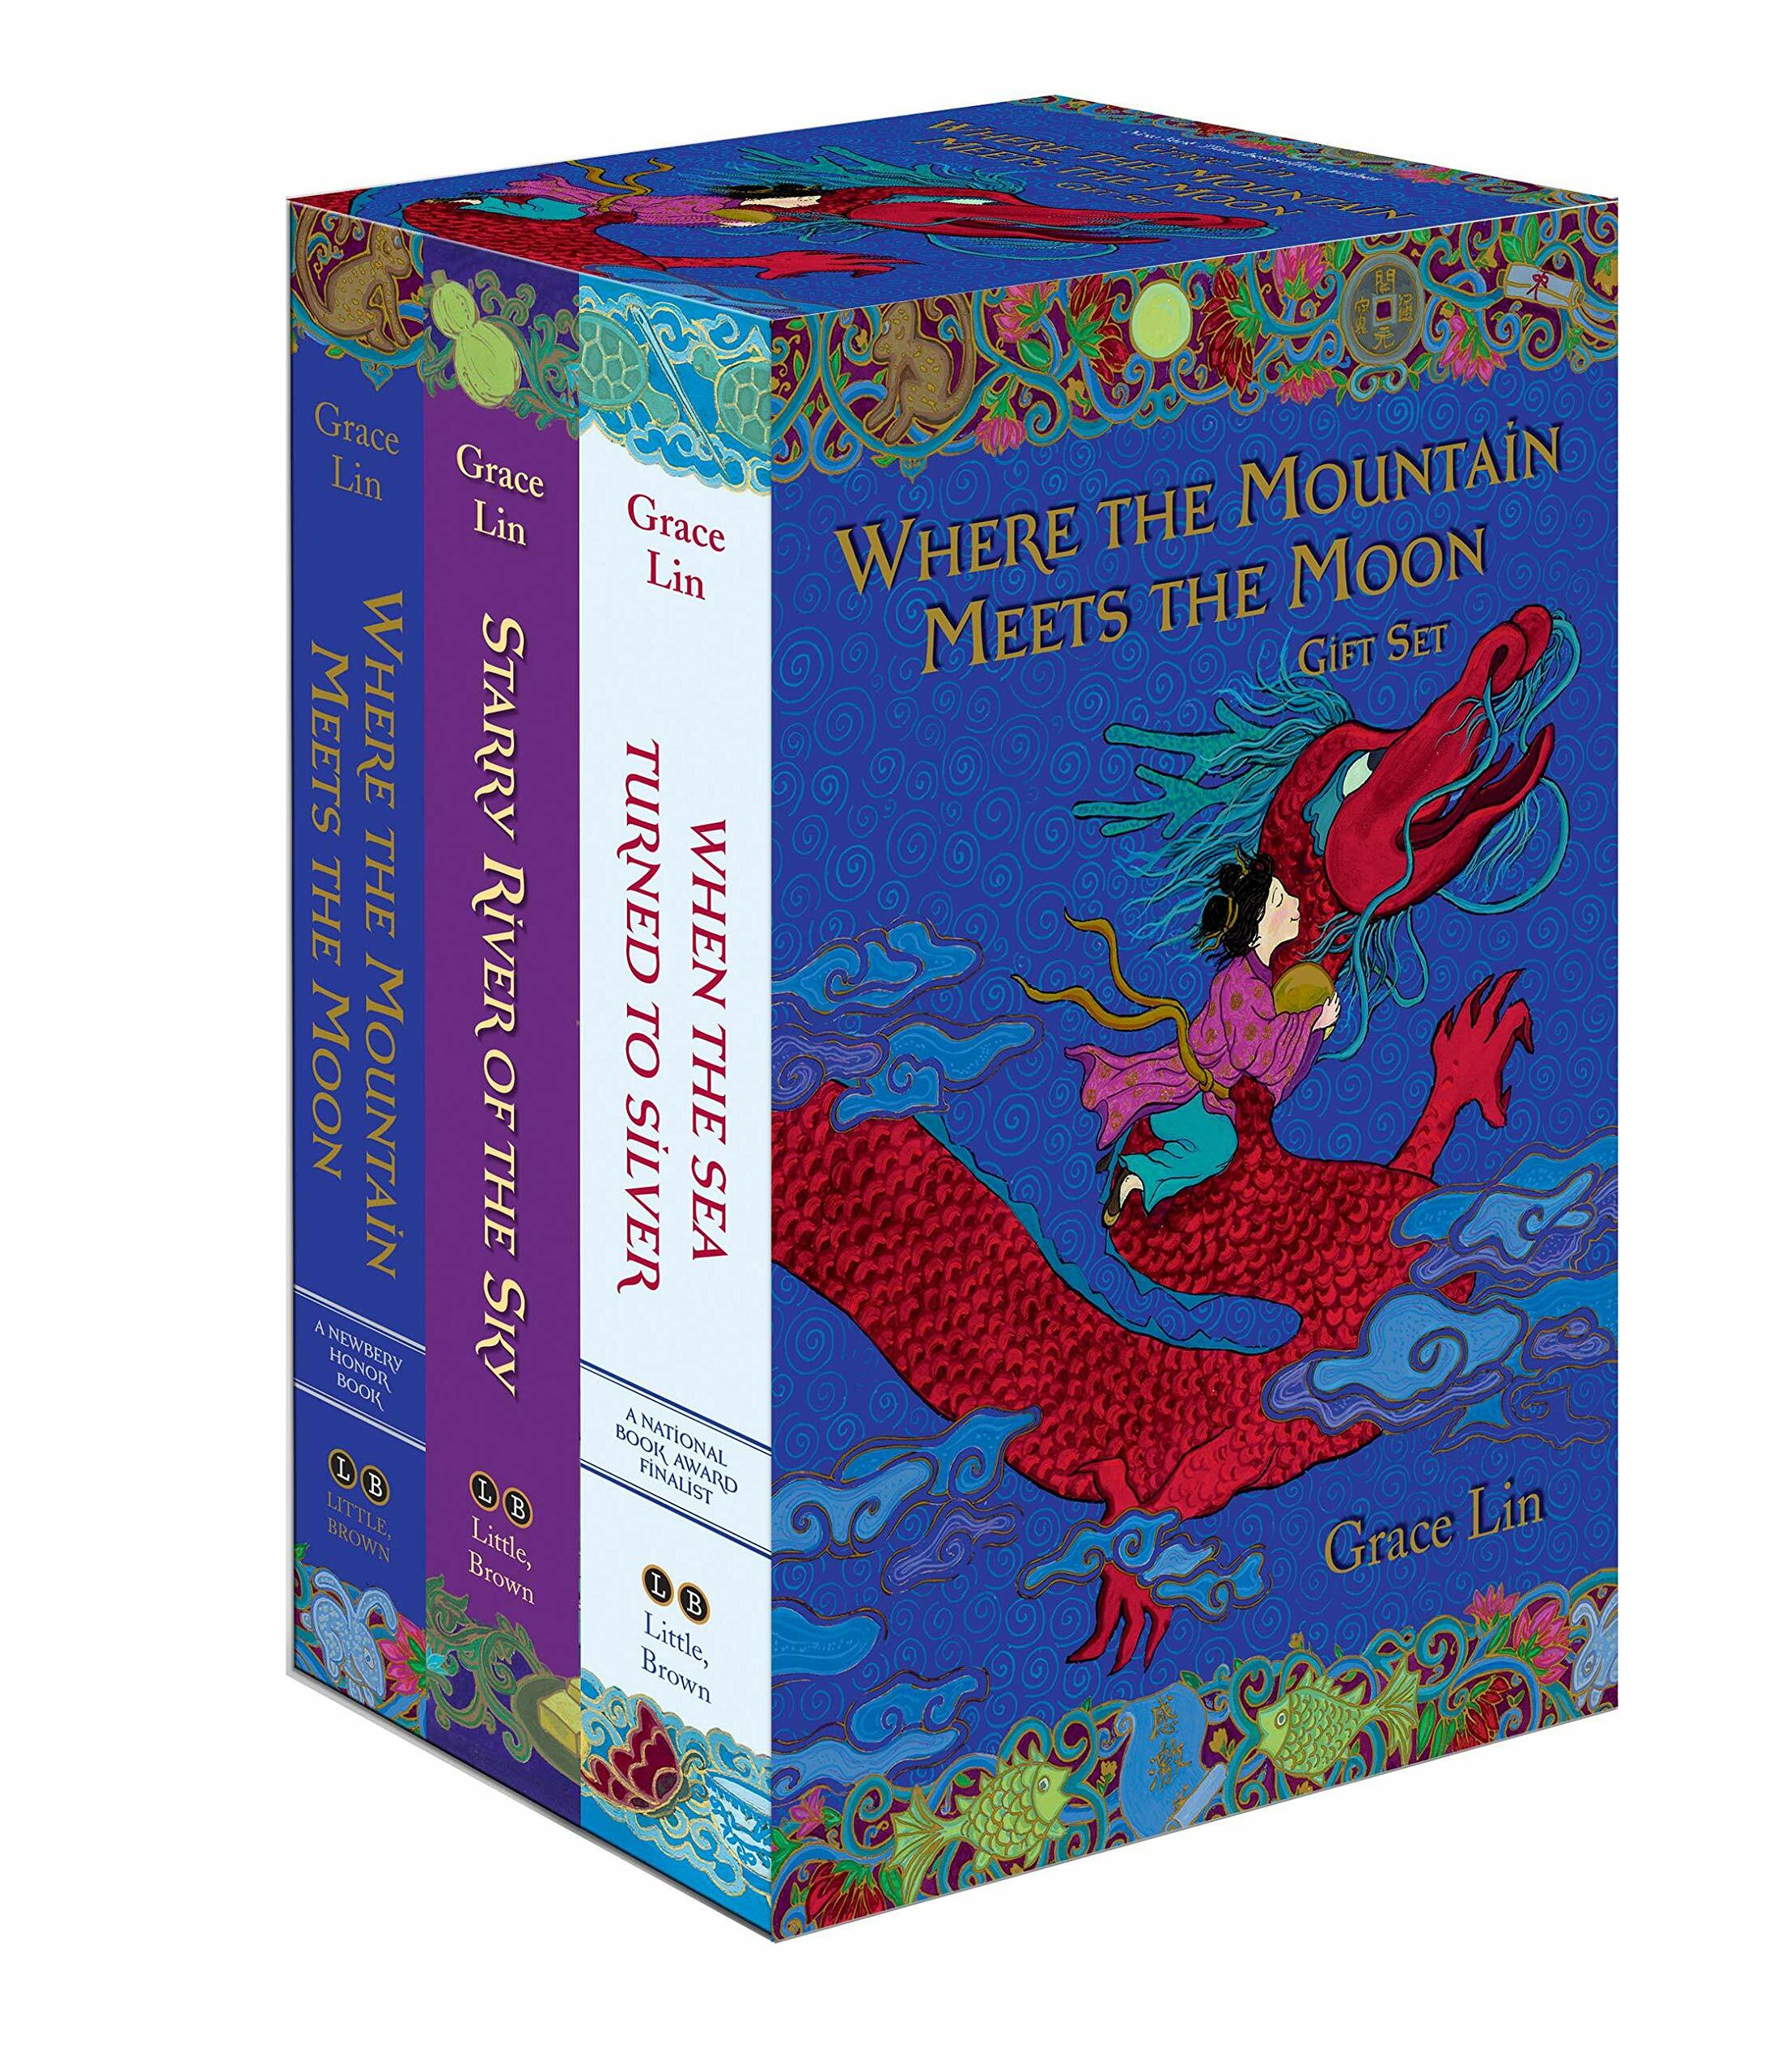 Where the Mountain Meets the Moon Gift Set (Boxed Set)